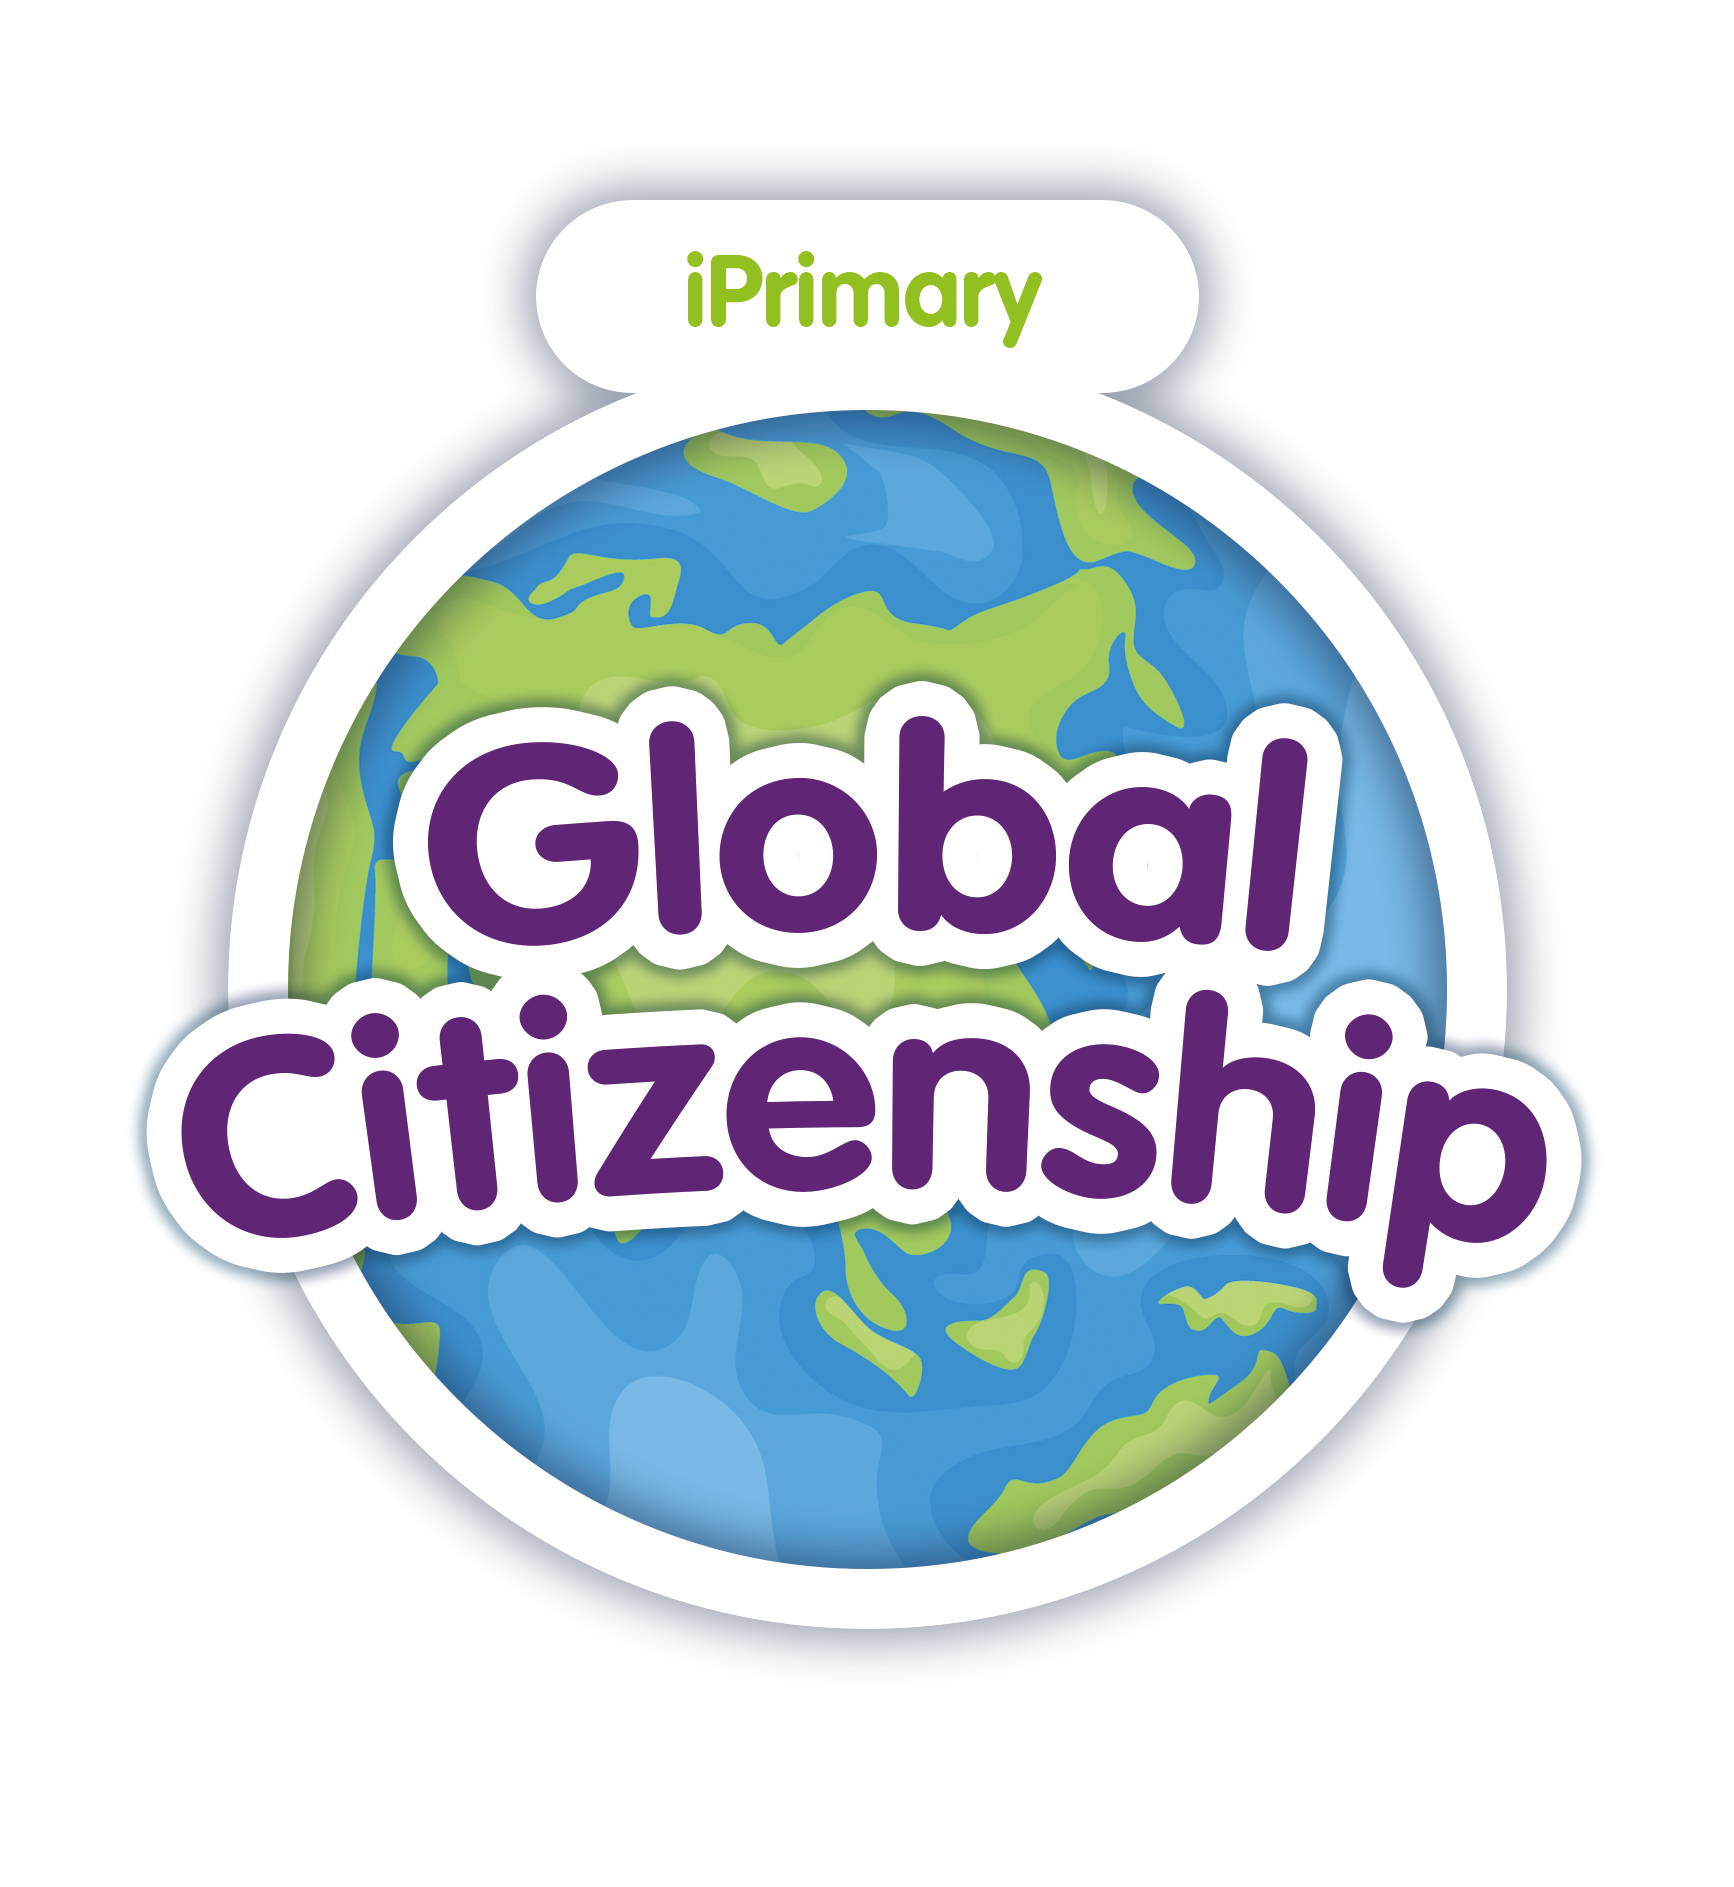 iPrimary Global Citizenship badge